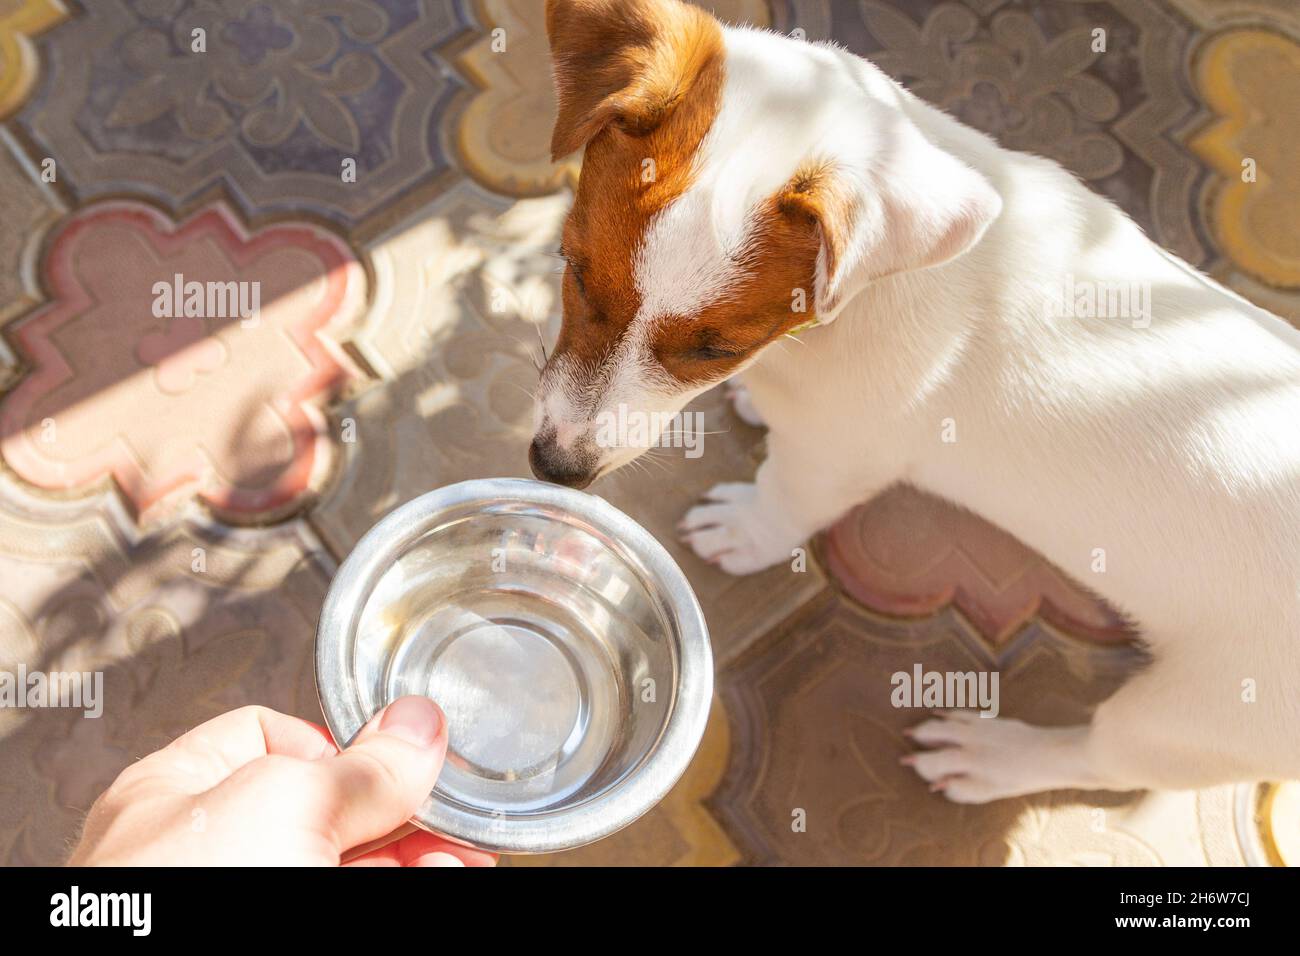 Domestic life with dog. Hungry dog with sad eyes is waiting for feeding. Hungry or thirsty dog fetches metal bowl to get feed or water. Stock Photo